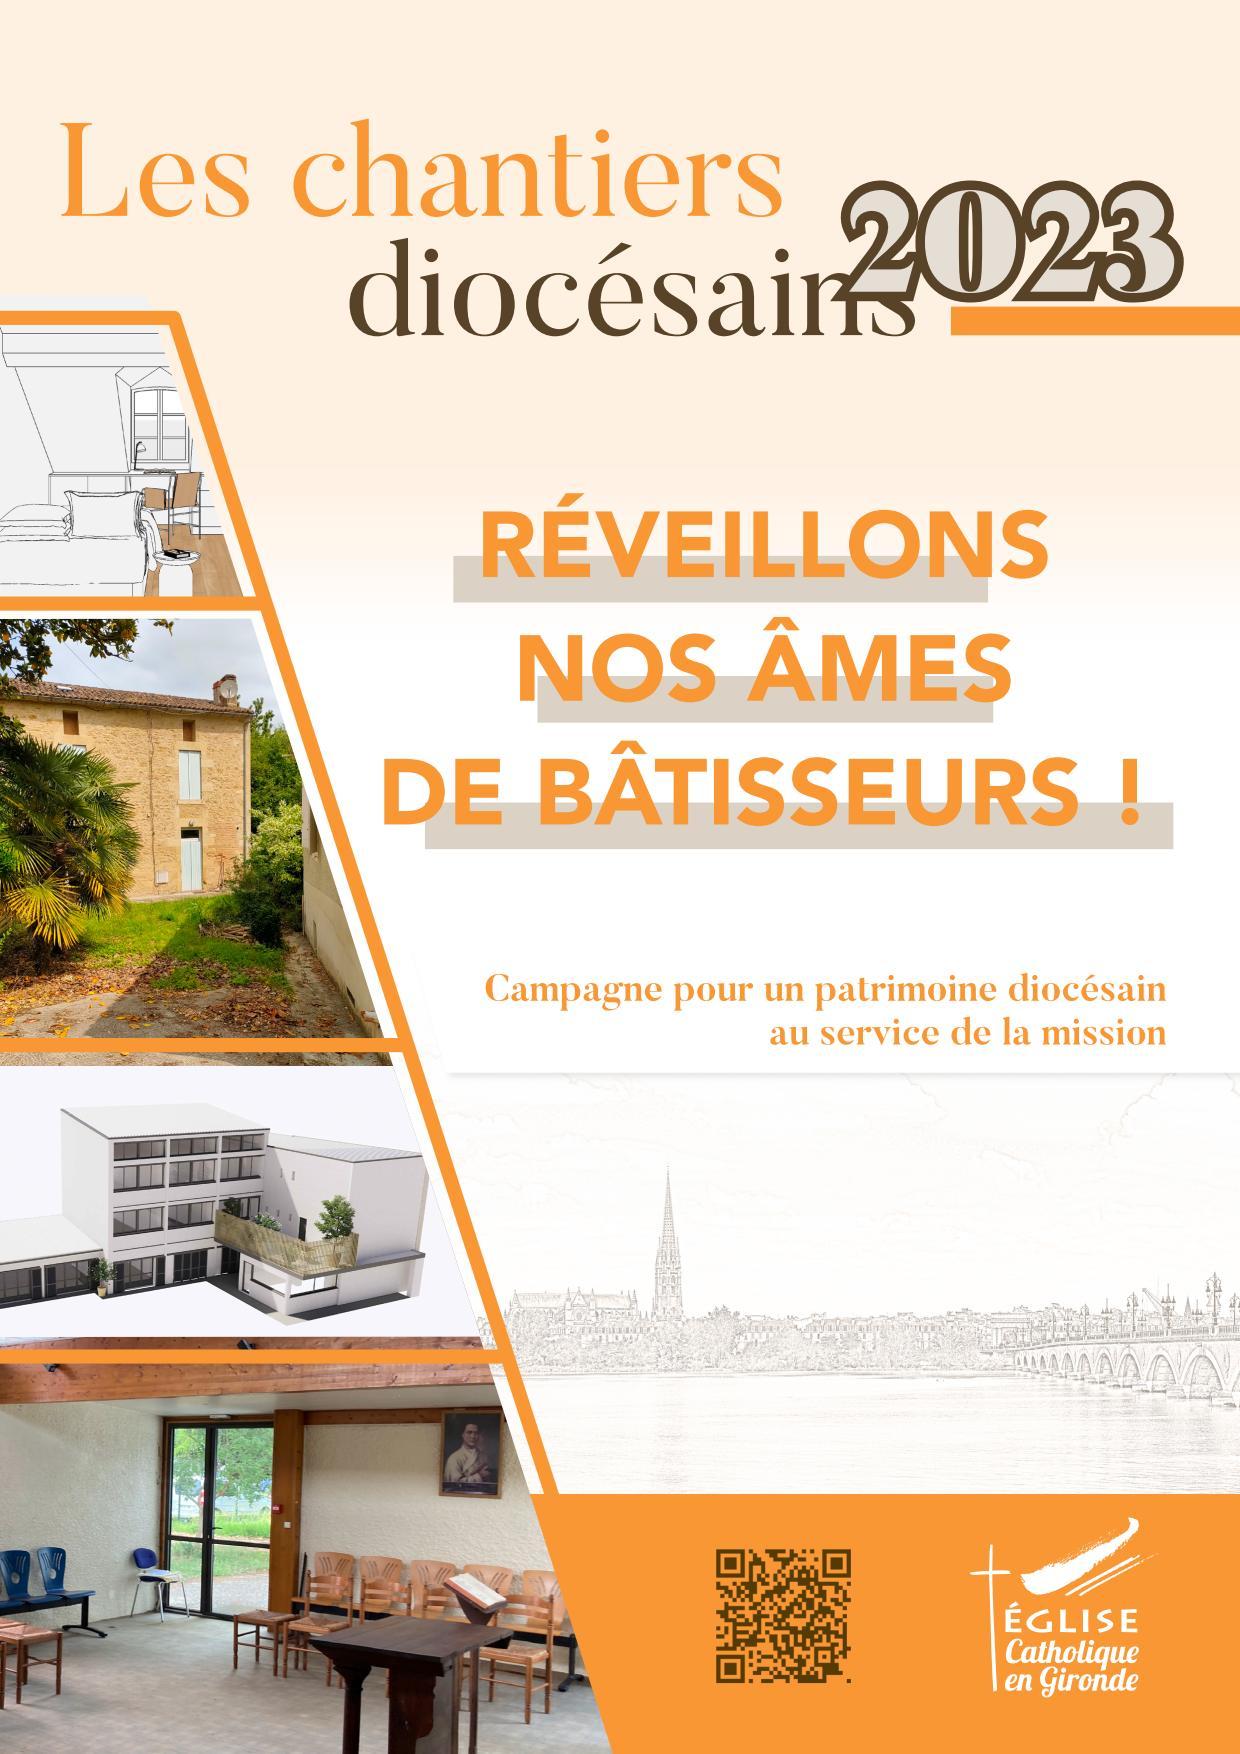 Chantiers diocesains 2023